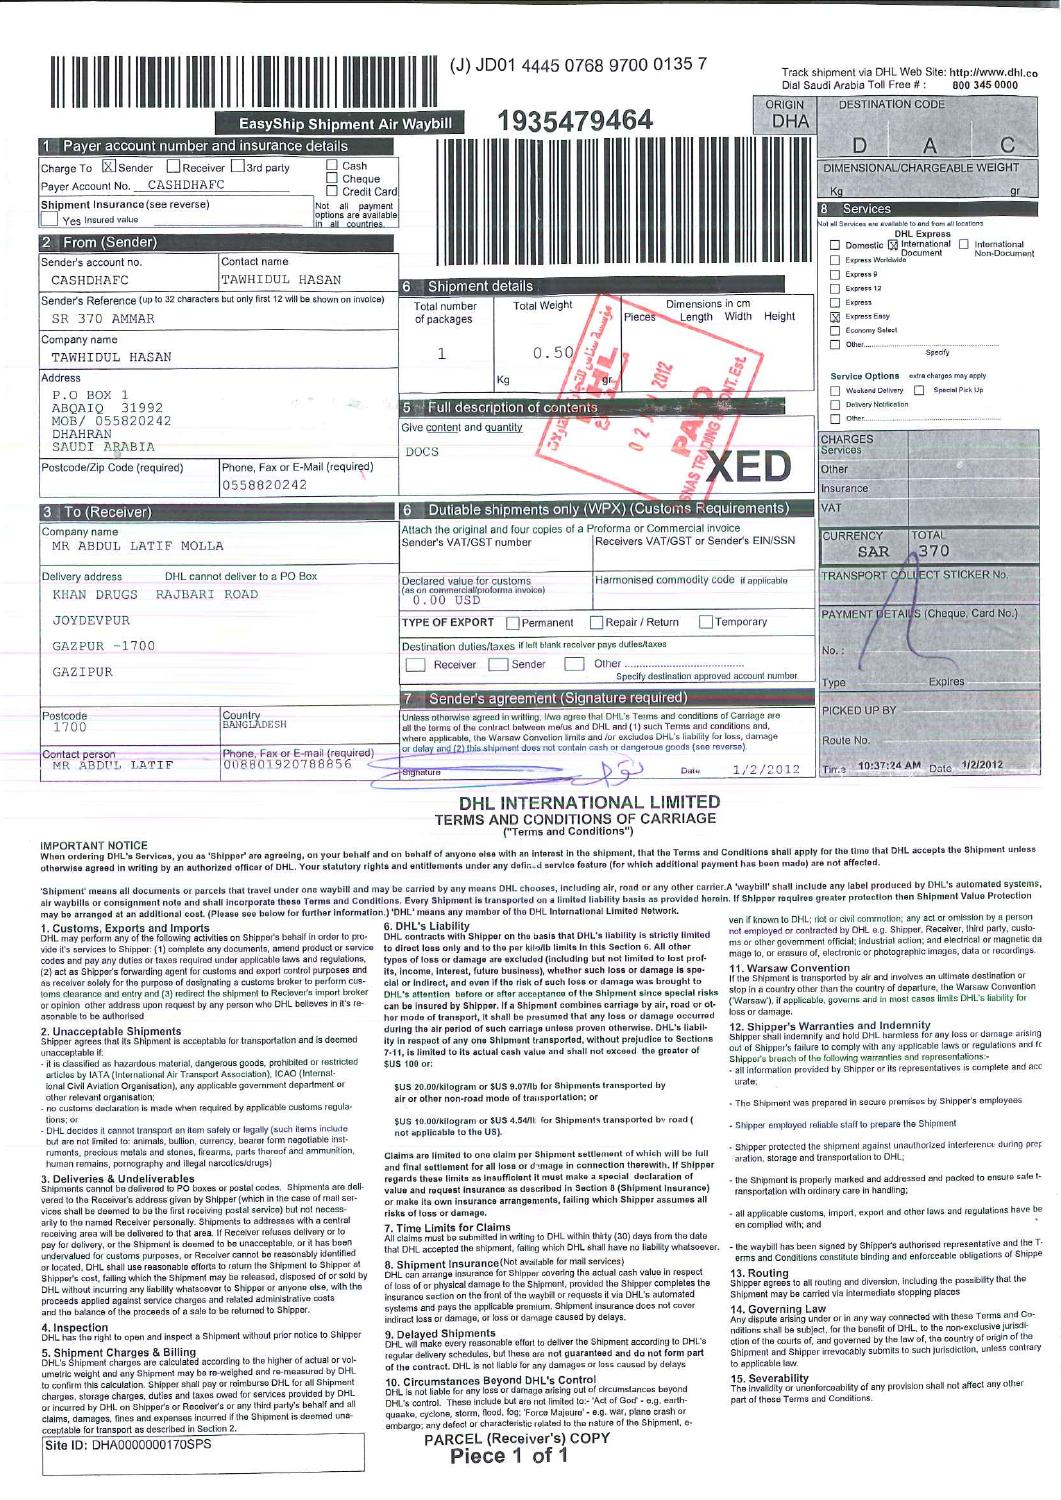 Dhl Receipt 1ps New Egcs S425 500 L7m By Dhl Or Ems Ebay Graphic Design product Design